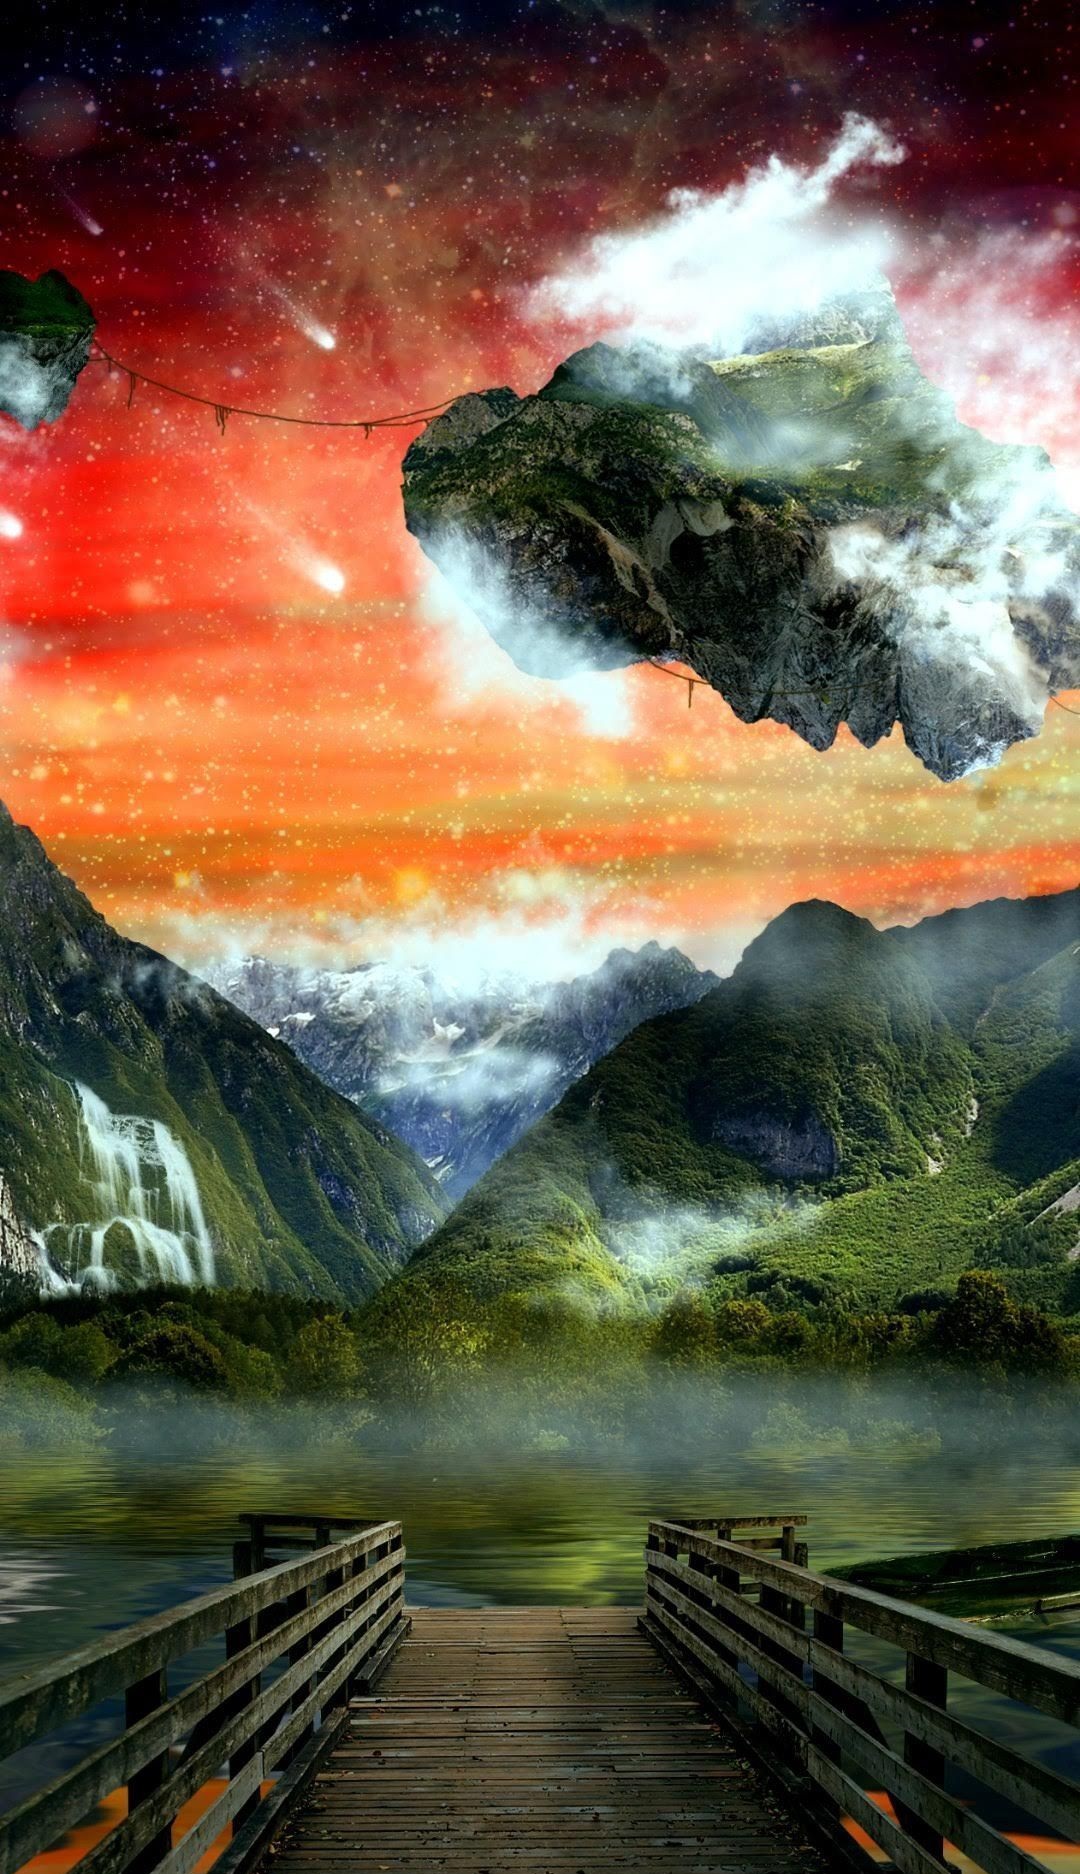 Download this free wallpaper with a landscape of a floating island in the sky - 3D